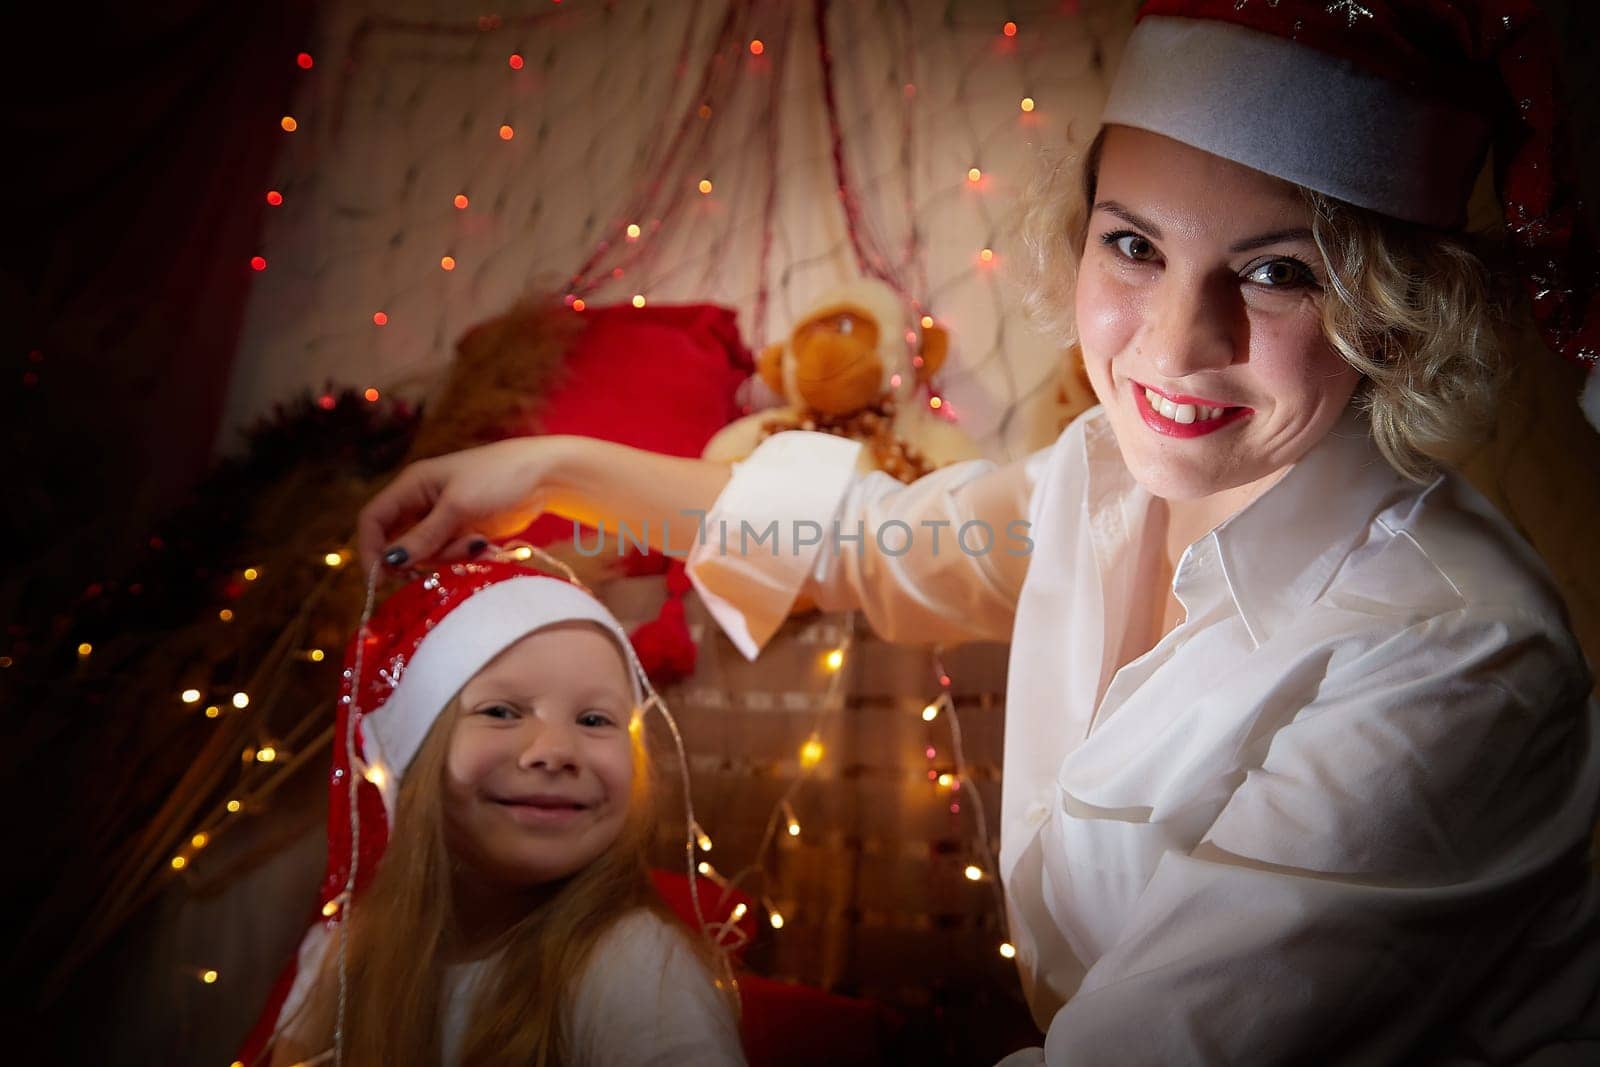 Cute mother and daughter in the red hats of Santa Claus assistants in a room decorated for Christmas. The tradition of decorating house and dressing up for holidays. Happy childhood and motherhood